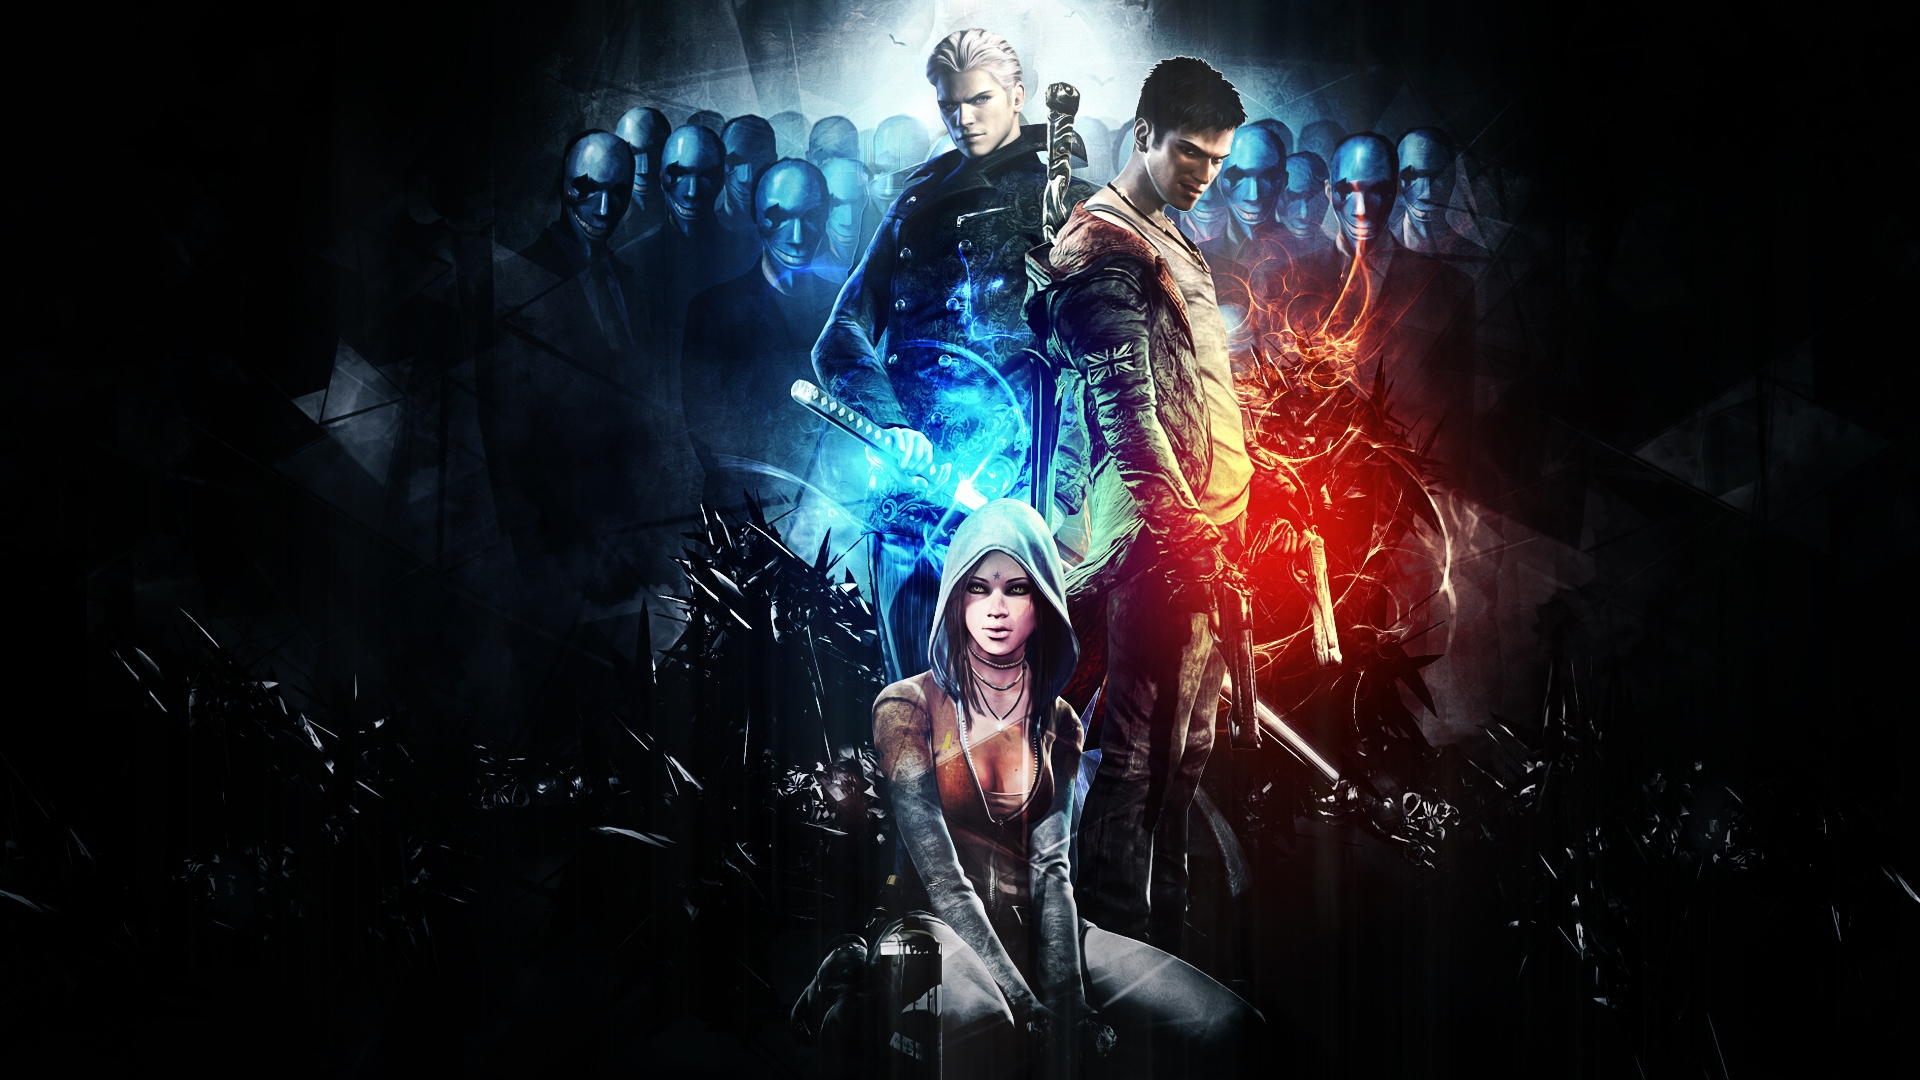 devil may cry 5 wallpaper,fictional character,darkness,cg artwork,graphic design,movie